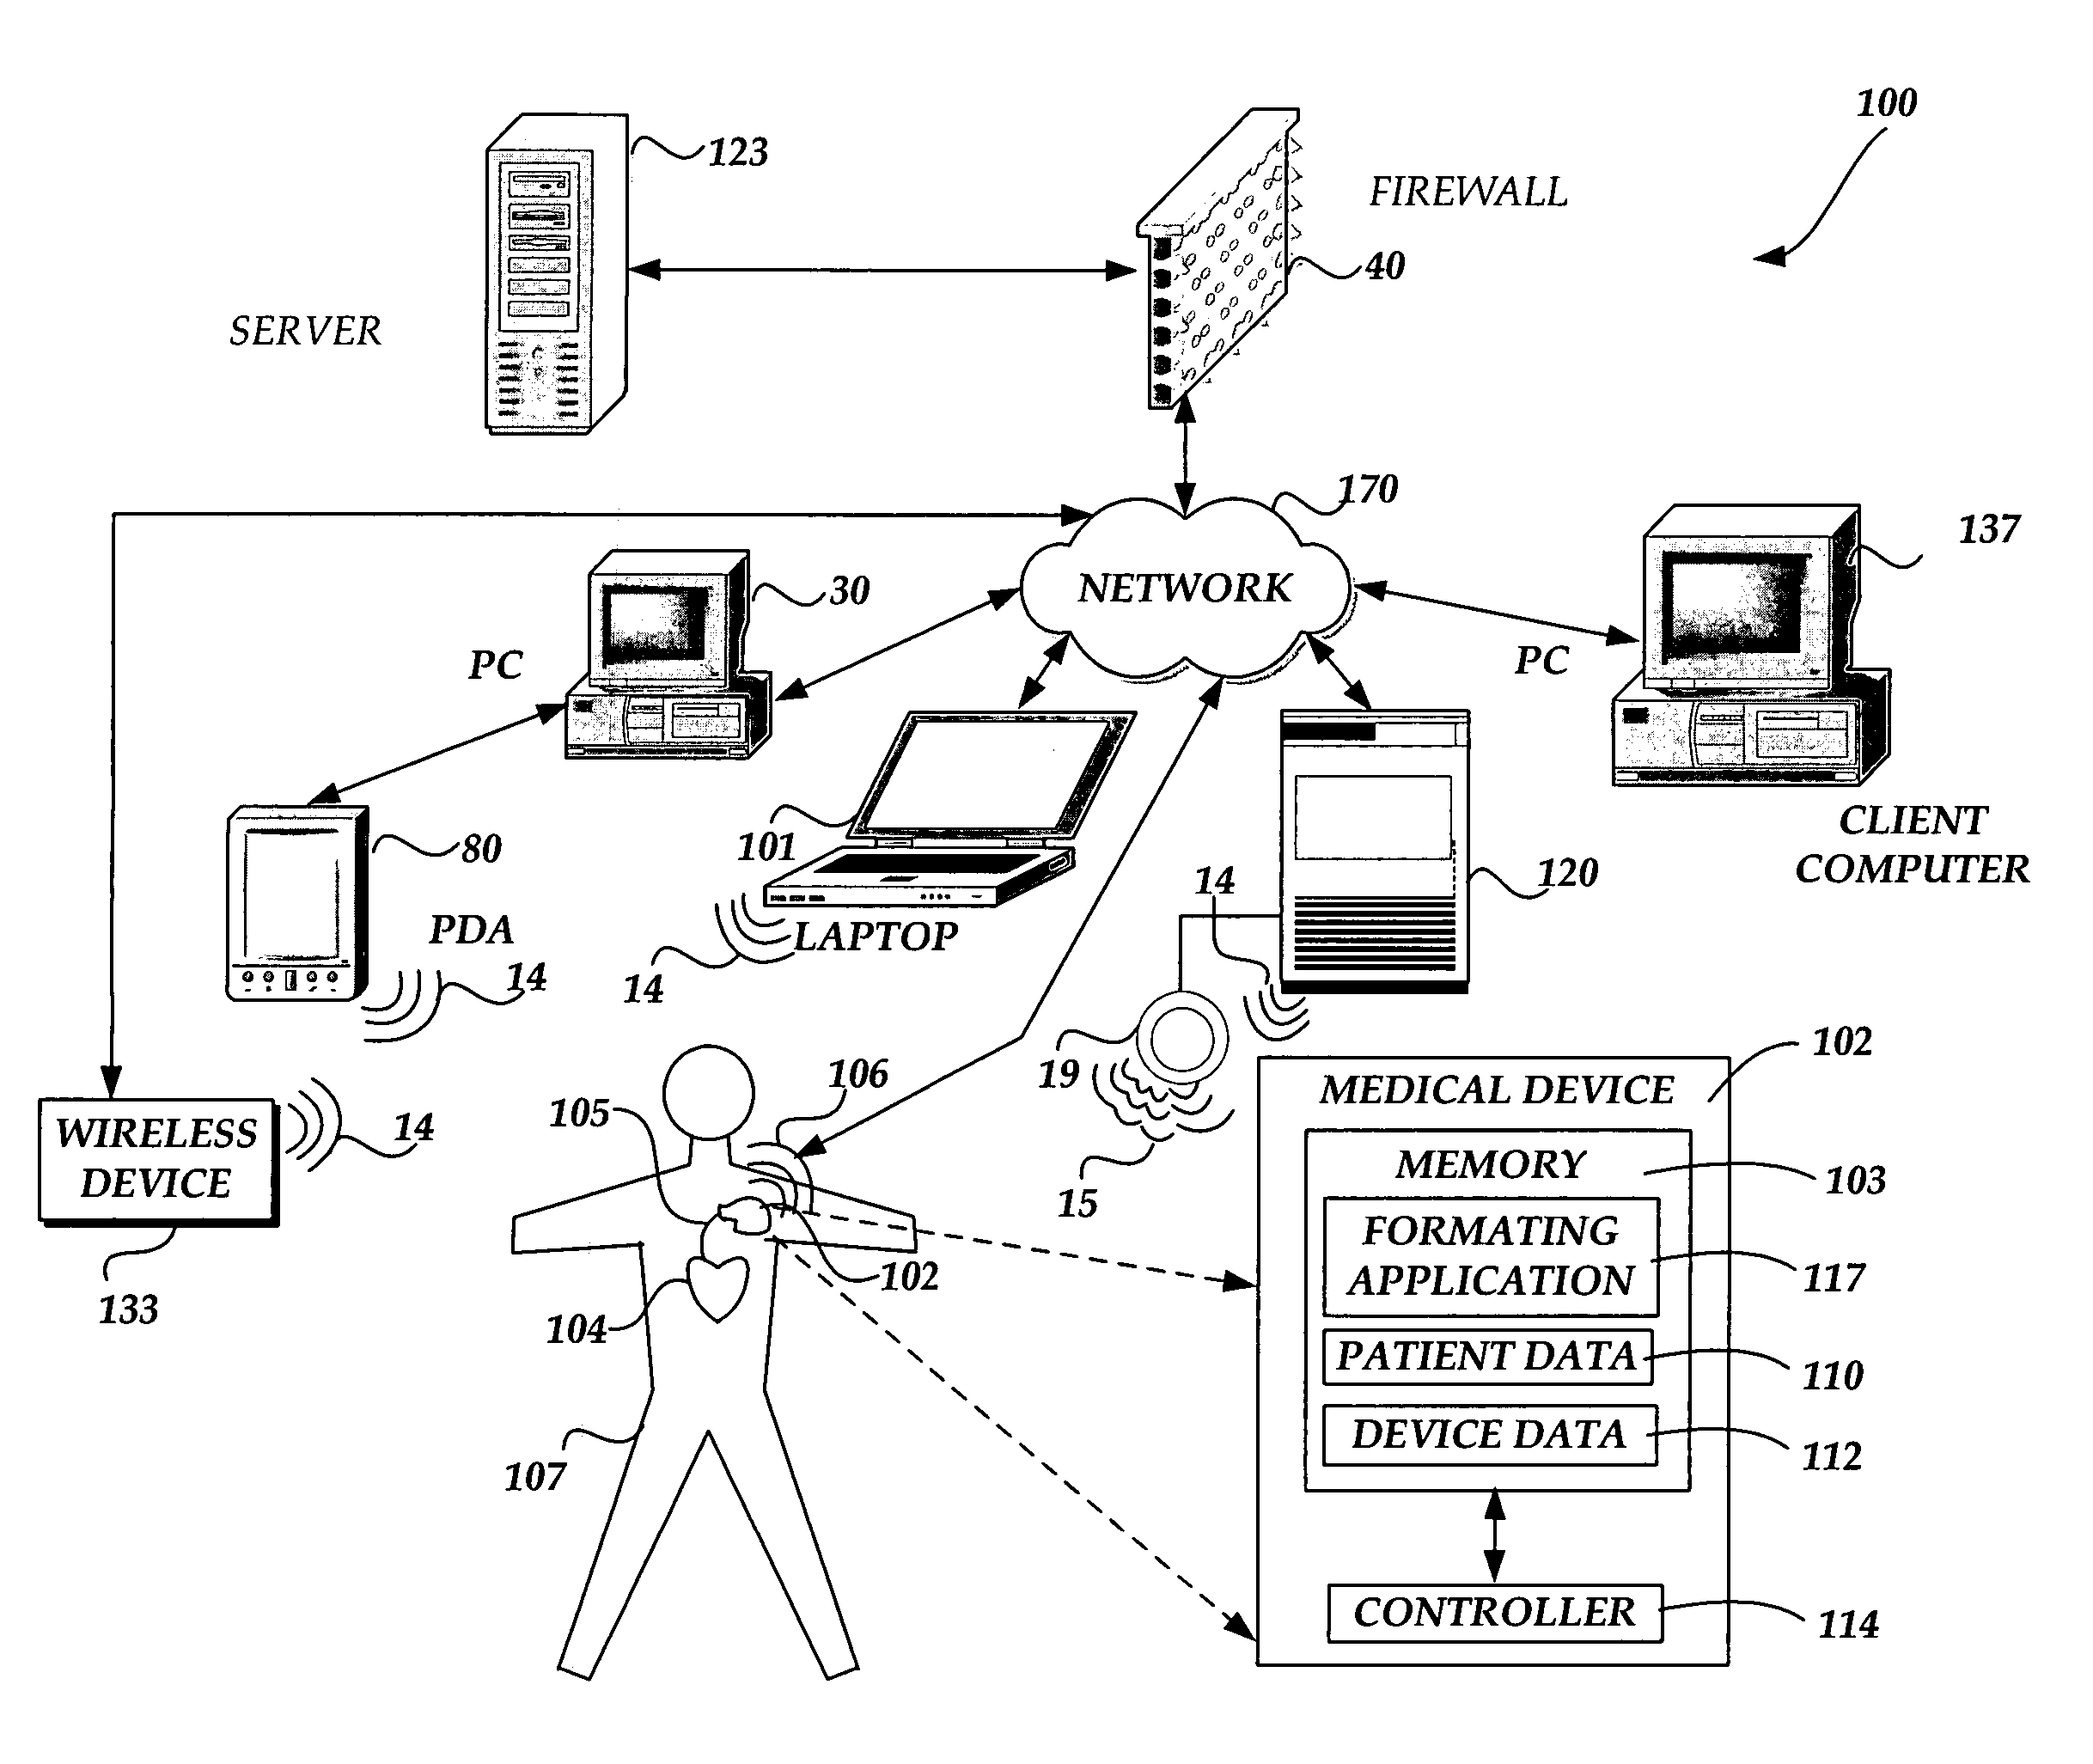 Generating and communicating web content from within an implantable medical device